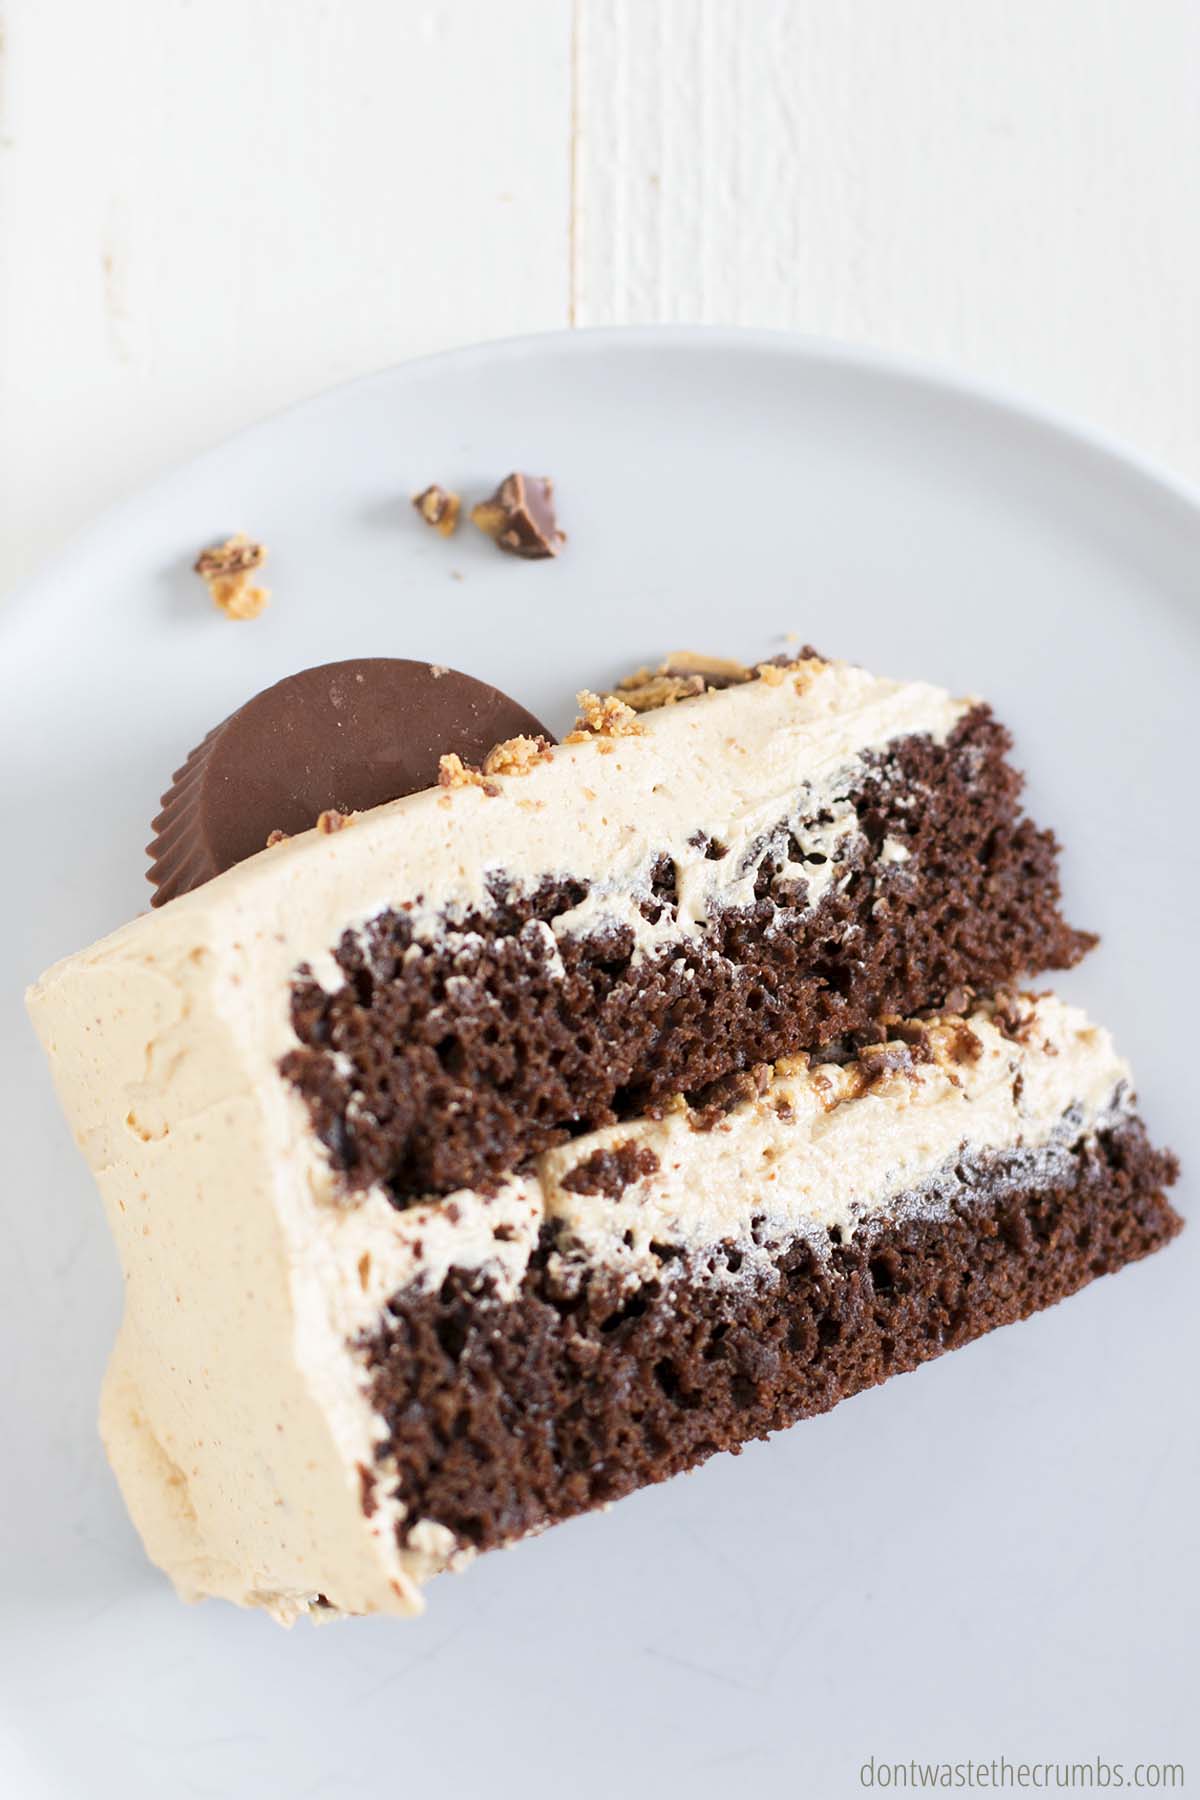 A delicious slice of peanut butter chocolate cake with a little crushed peanut butter cup on top.